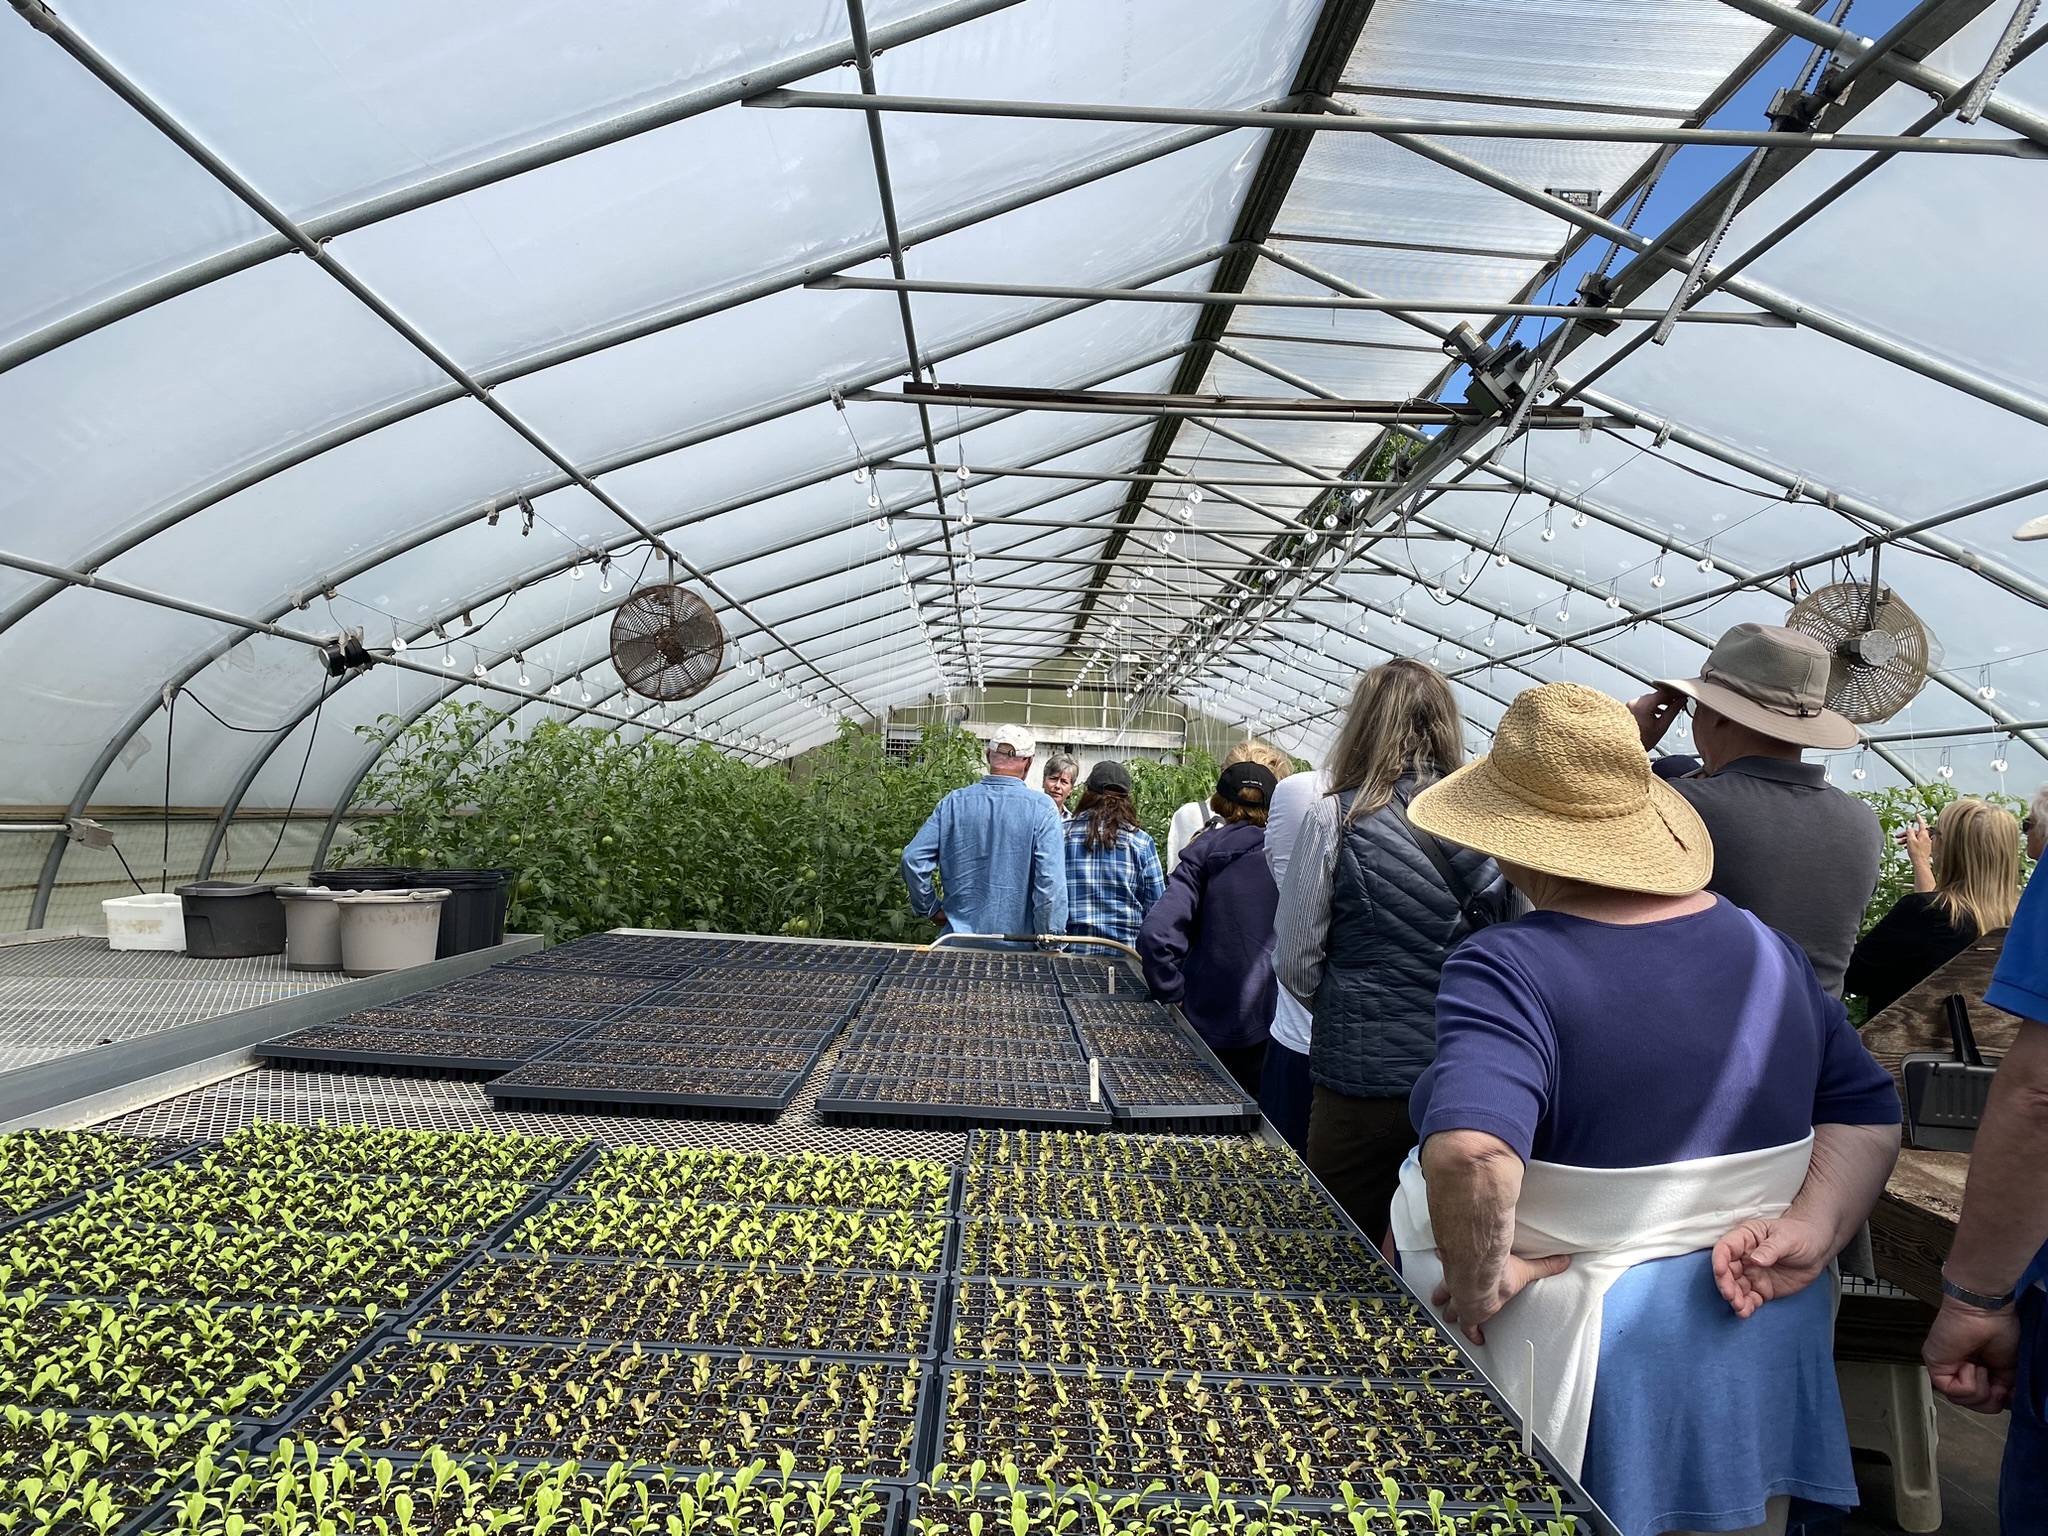 touring the greenhouse